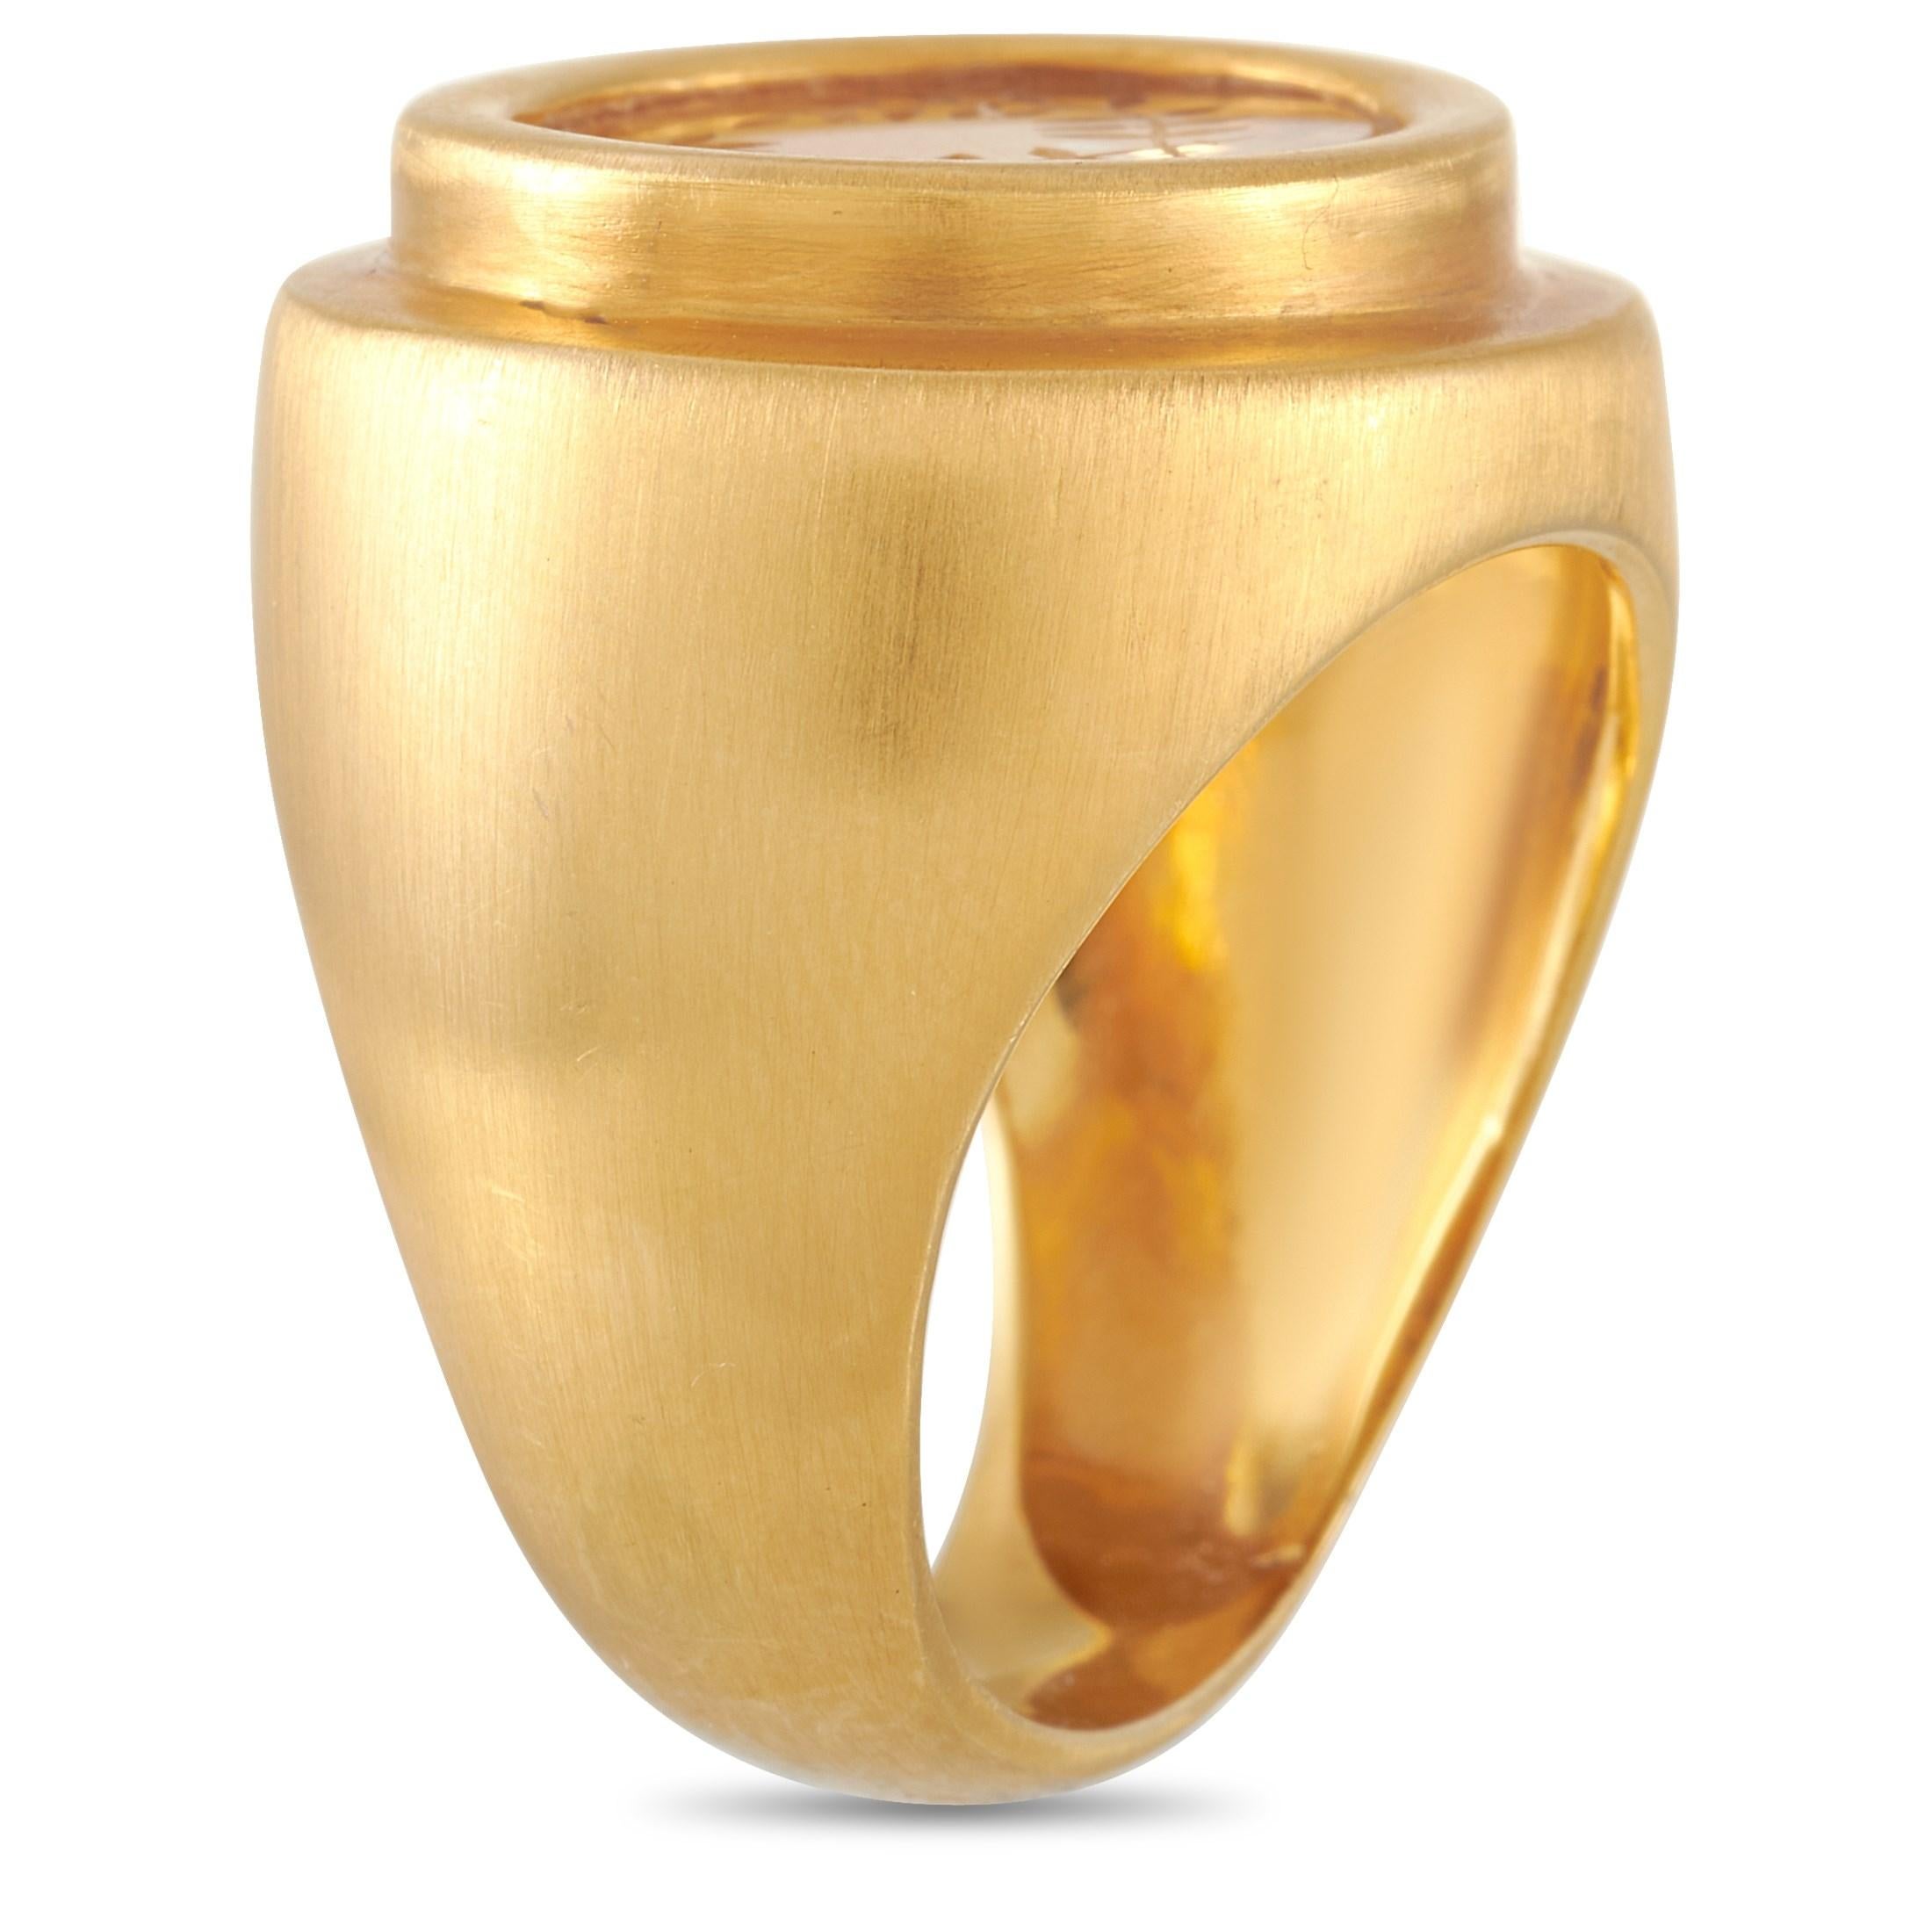 This vintage Zolotas Intaglio 18K Yellow Gold Citrine Ring is designed with a solid, chunky band that is 8mm thick with 5mm top height and 18mm by 20mm top dimensions. A hand-carved laurel wreath can be seen on the citrine gemstone set in rub over